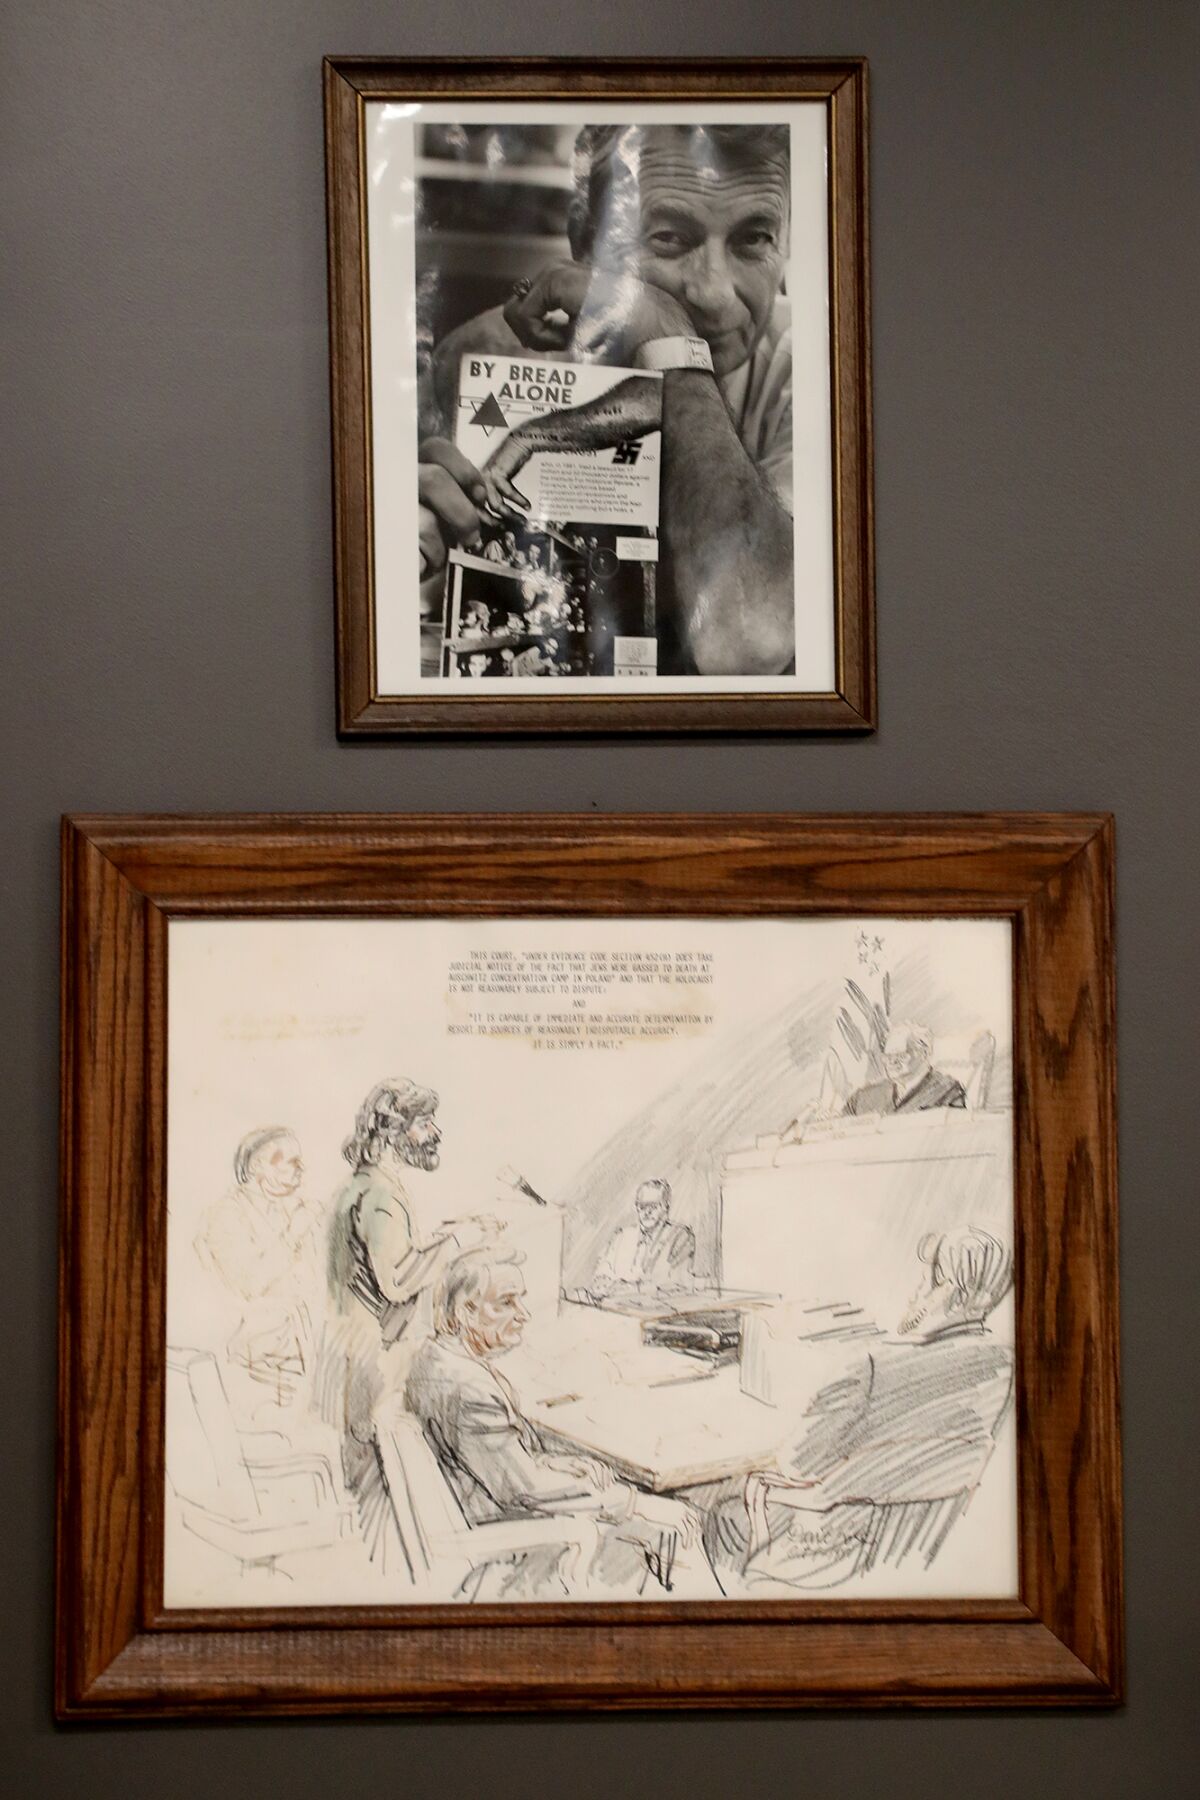 A picture of Mel Mermelstein above a sketch of Holocaust deniers in an exhibition 